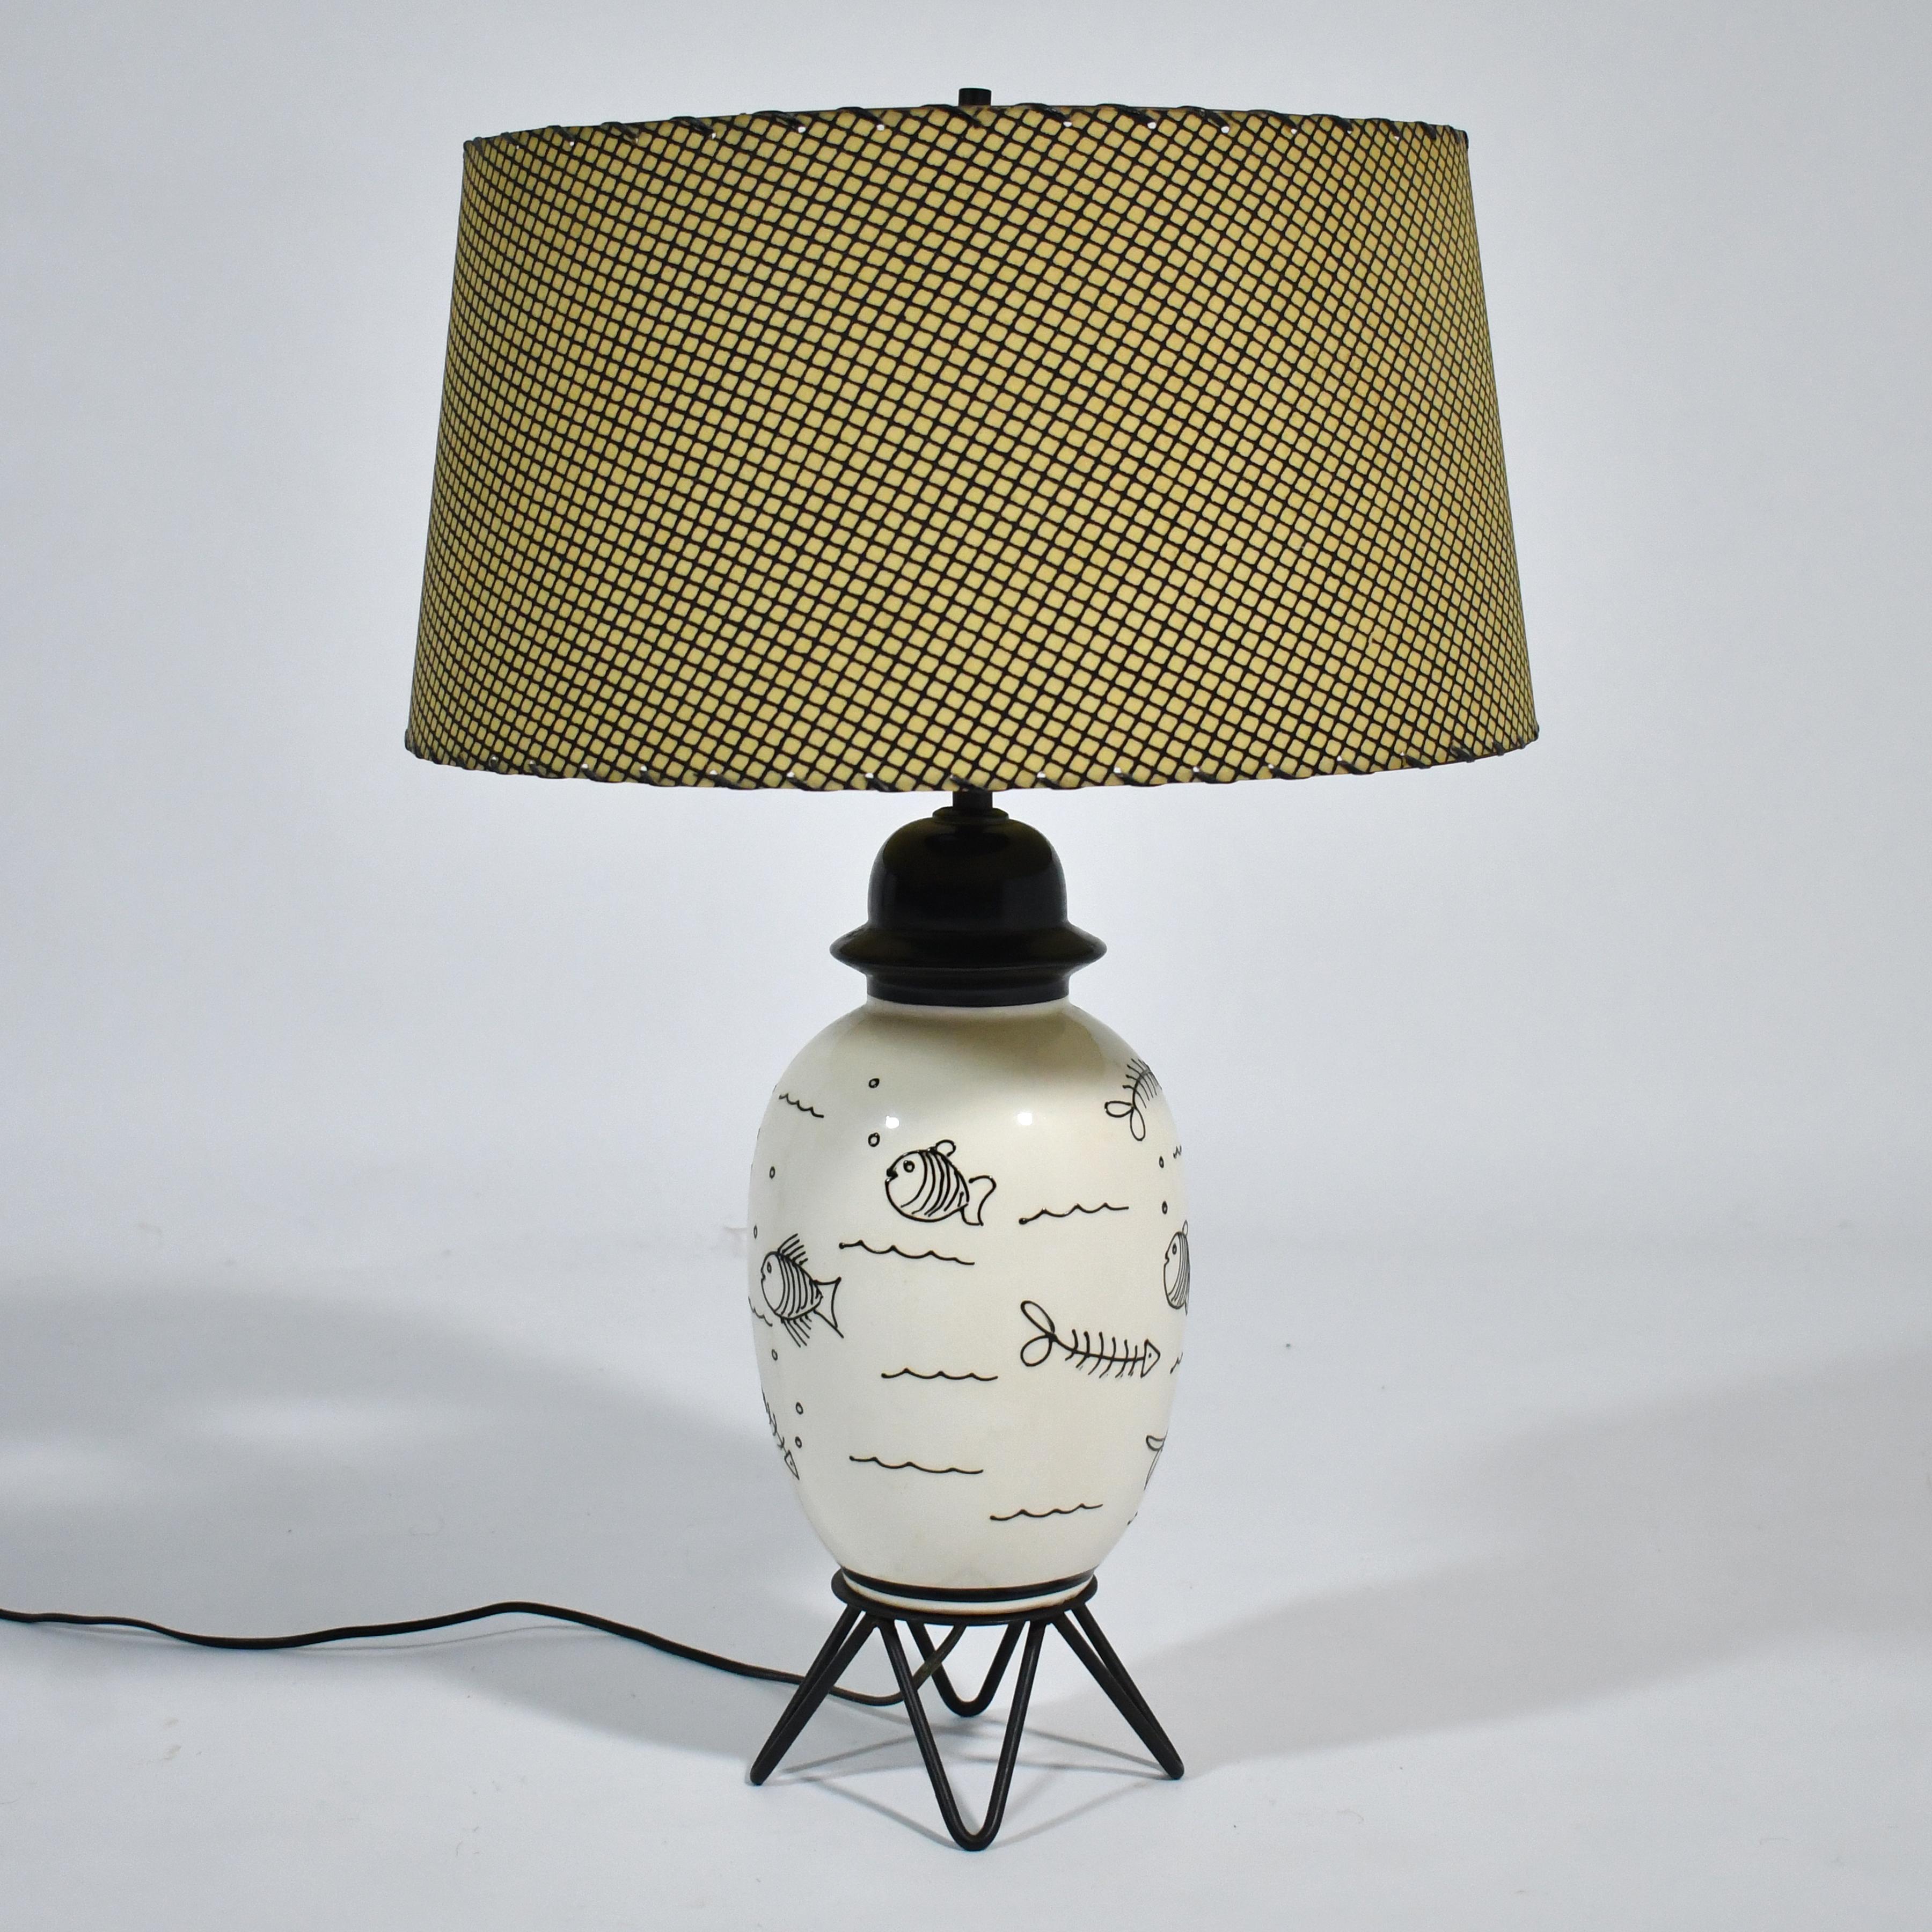 1950s Table Lamp with Whimsical Fish Design For Sale 2